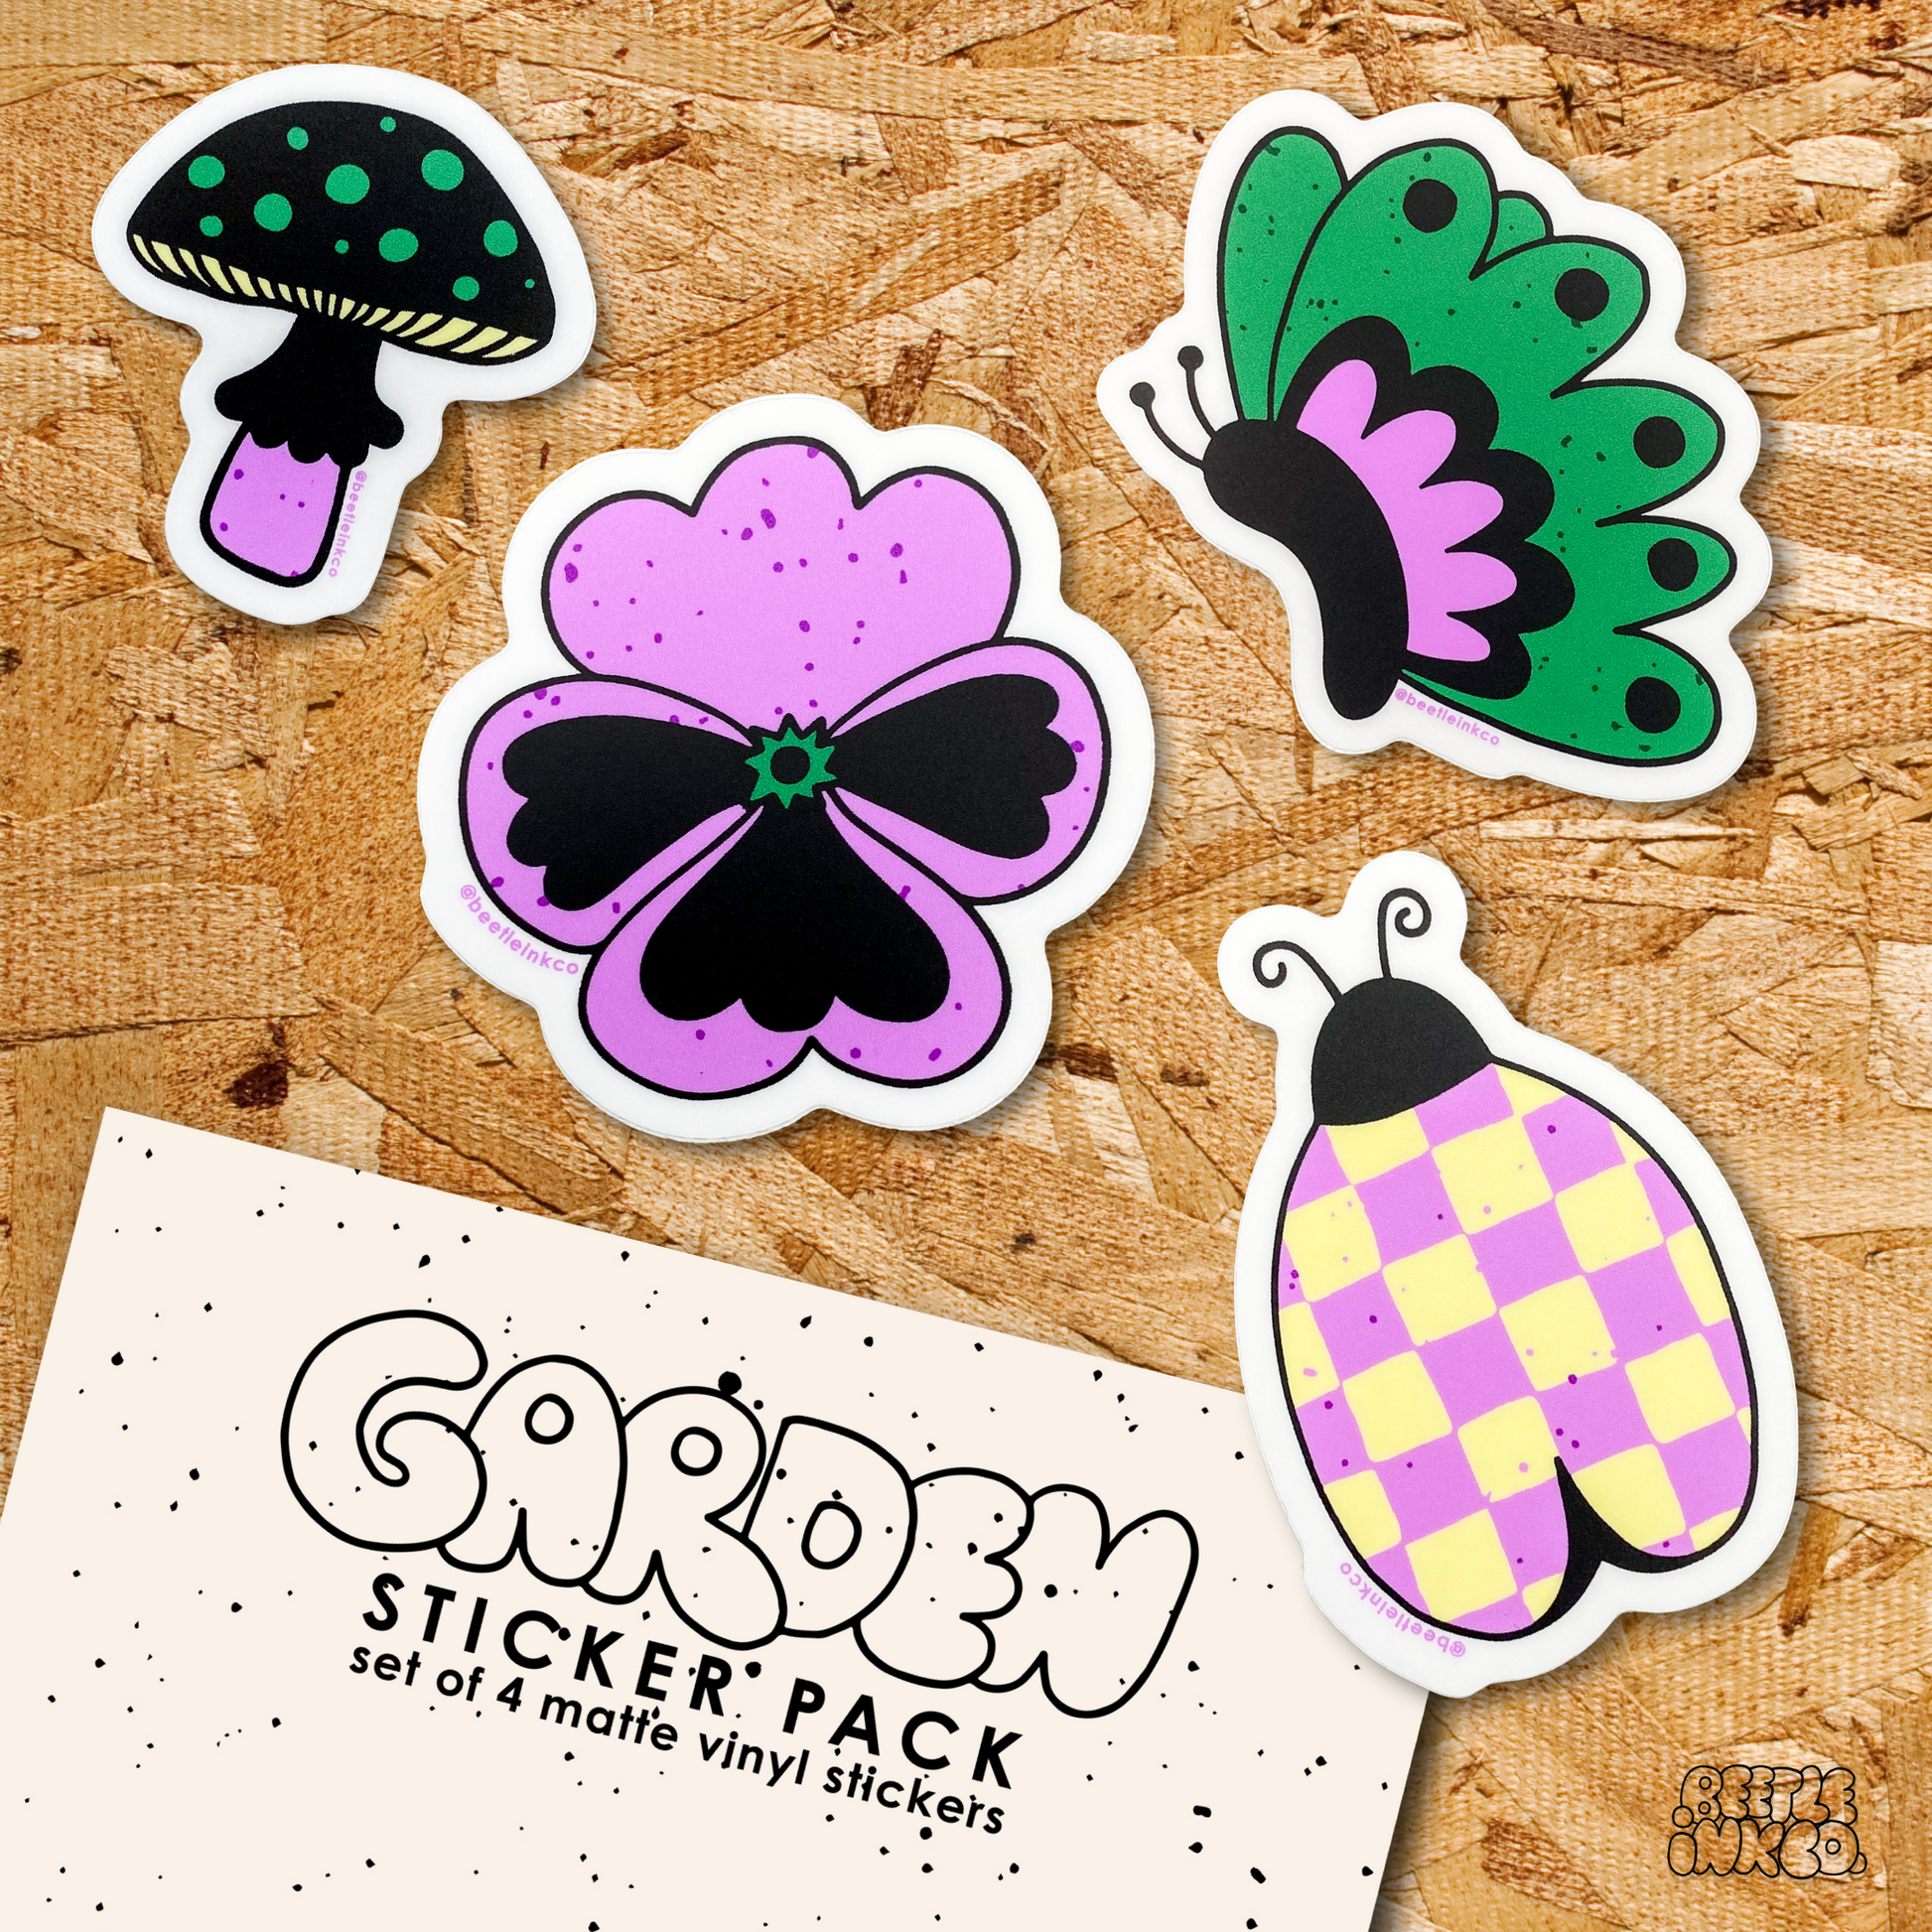 A garden sticker pack spills out onto a wood particle board.